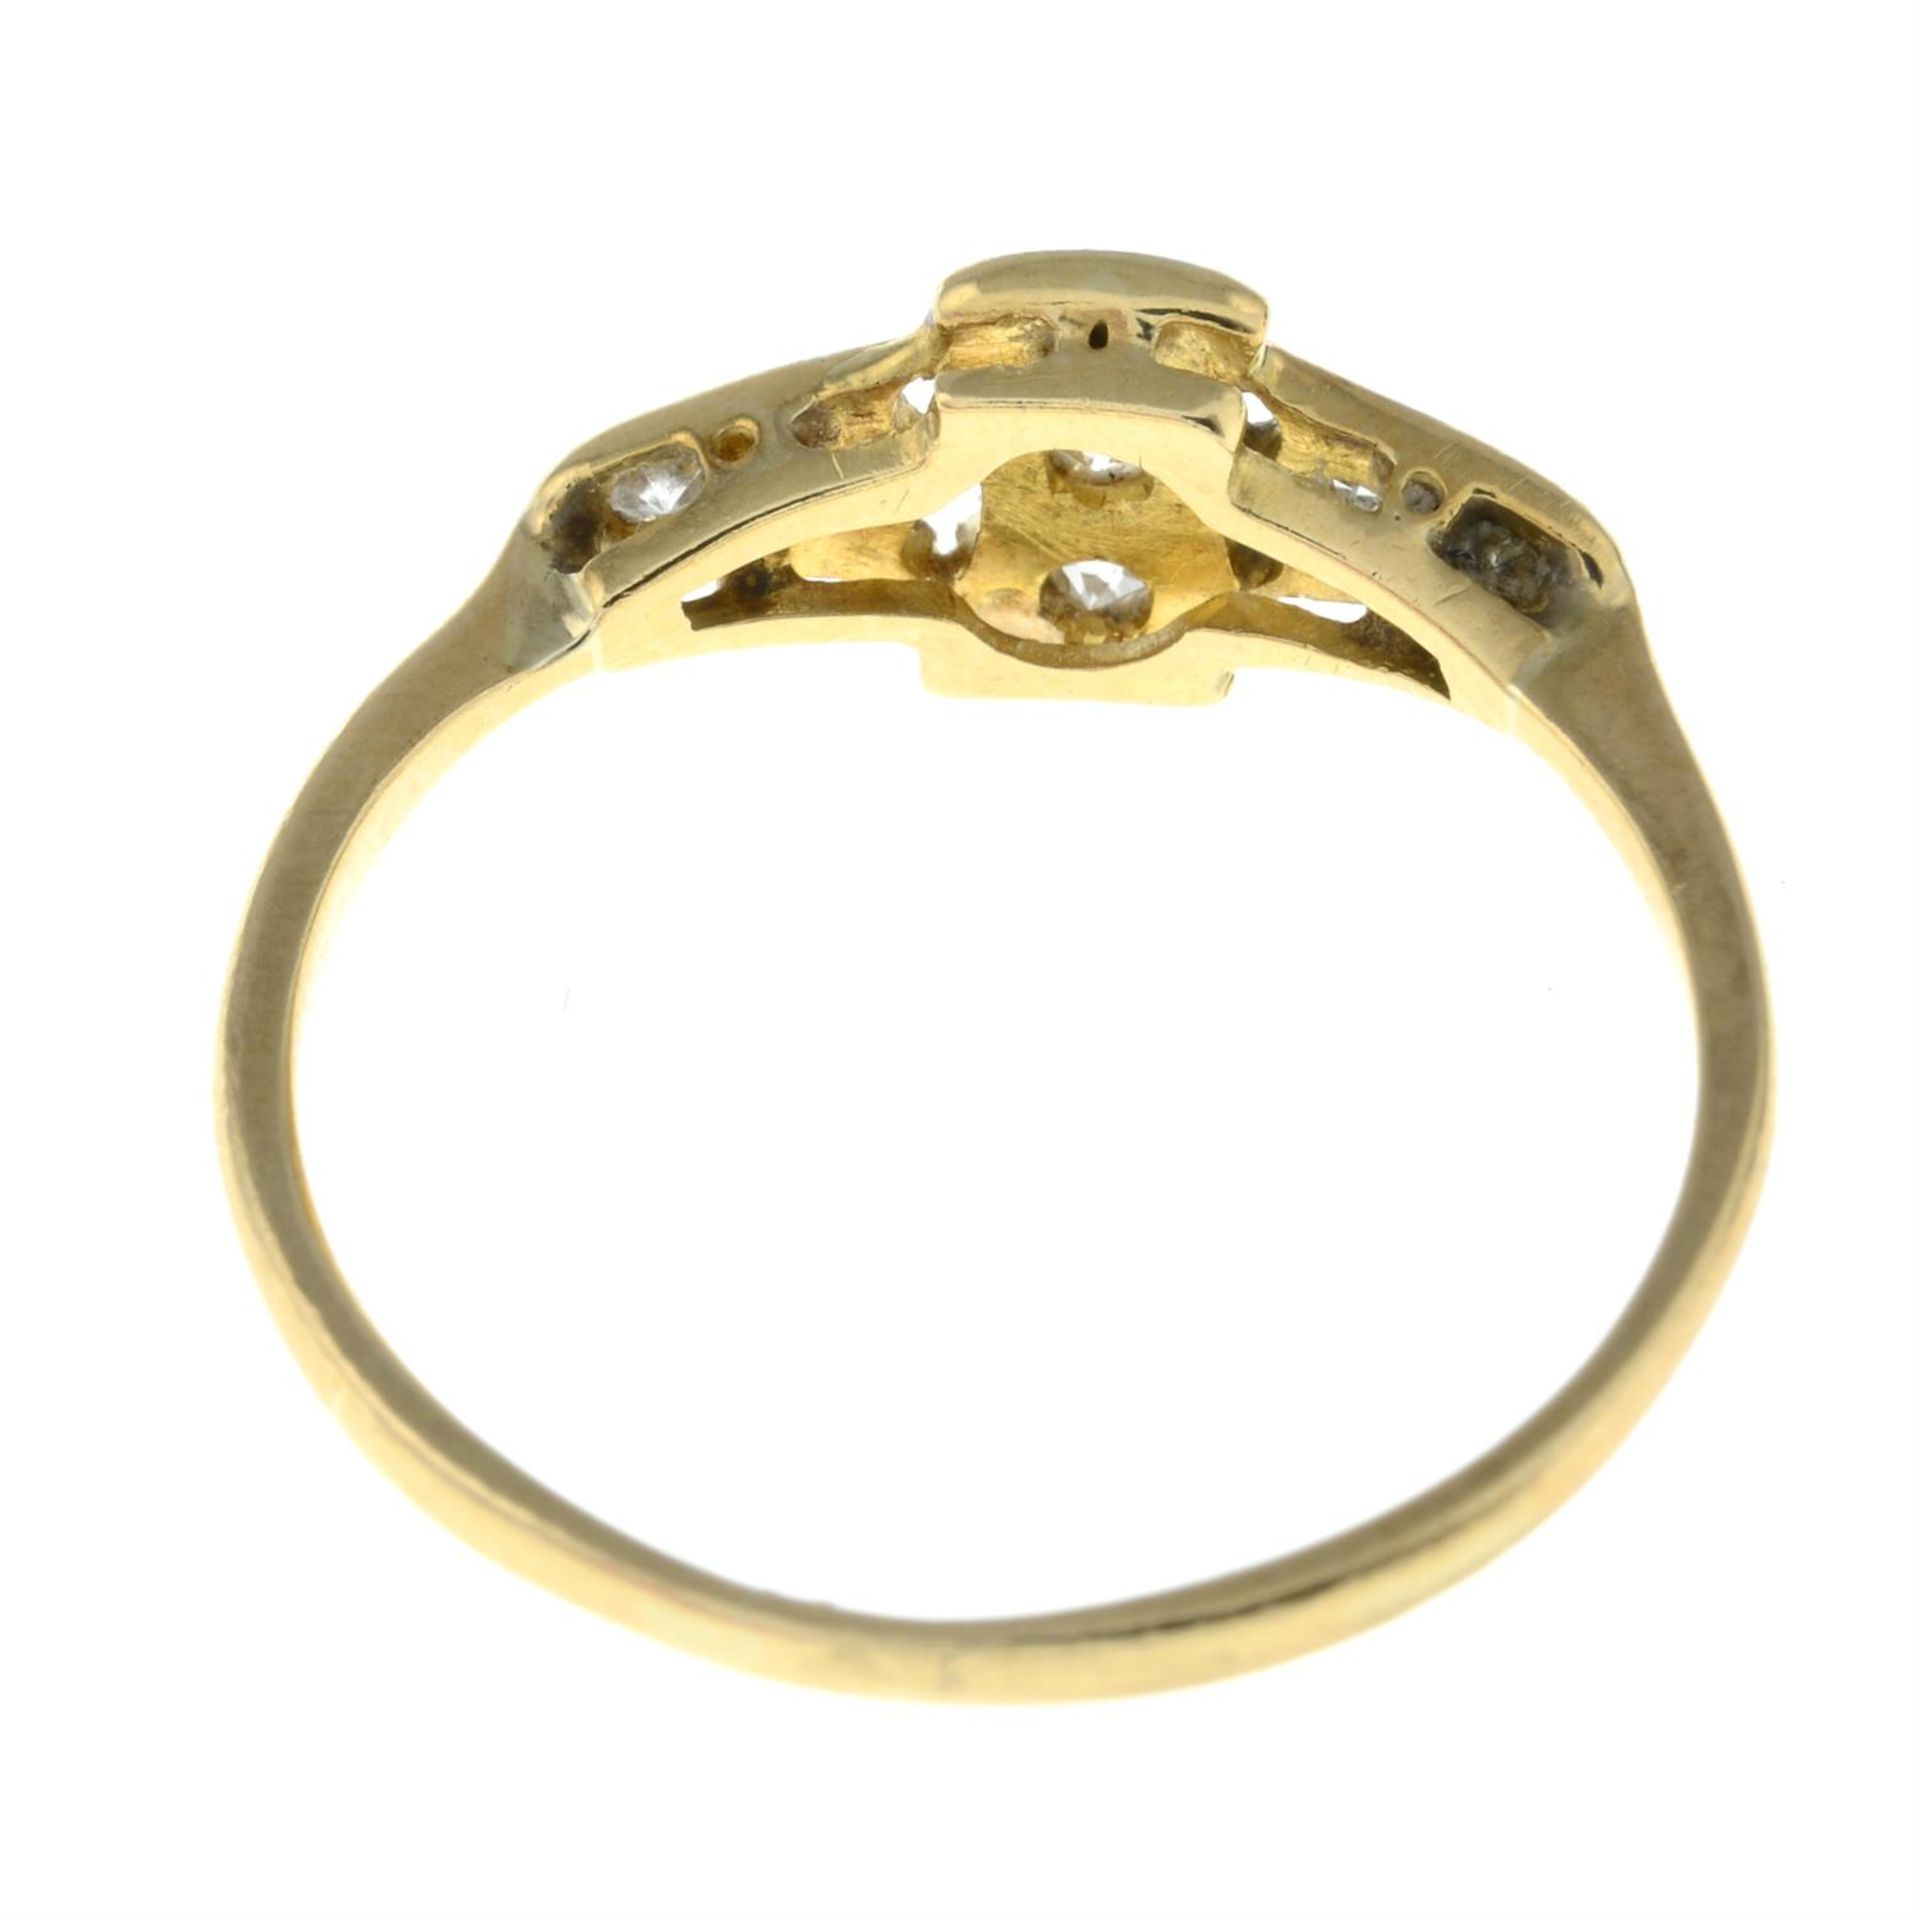 An early to mid 20th century 18ct gold and platinum single and old-cut diamond ring. - Image 2 of 2